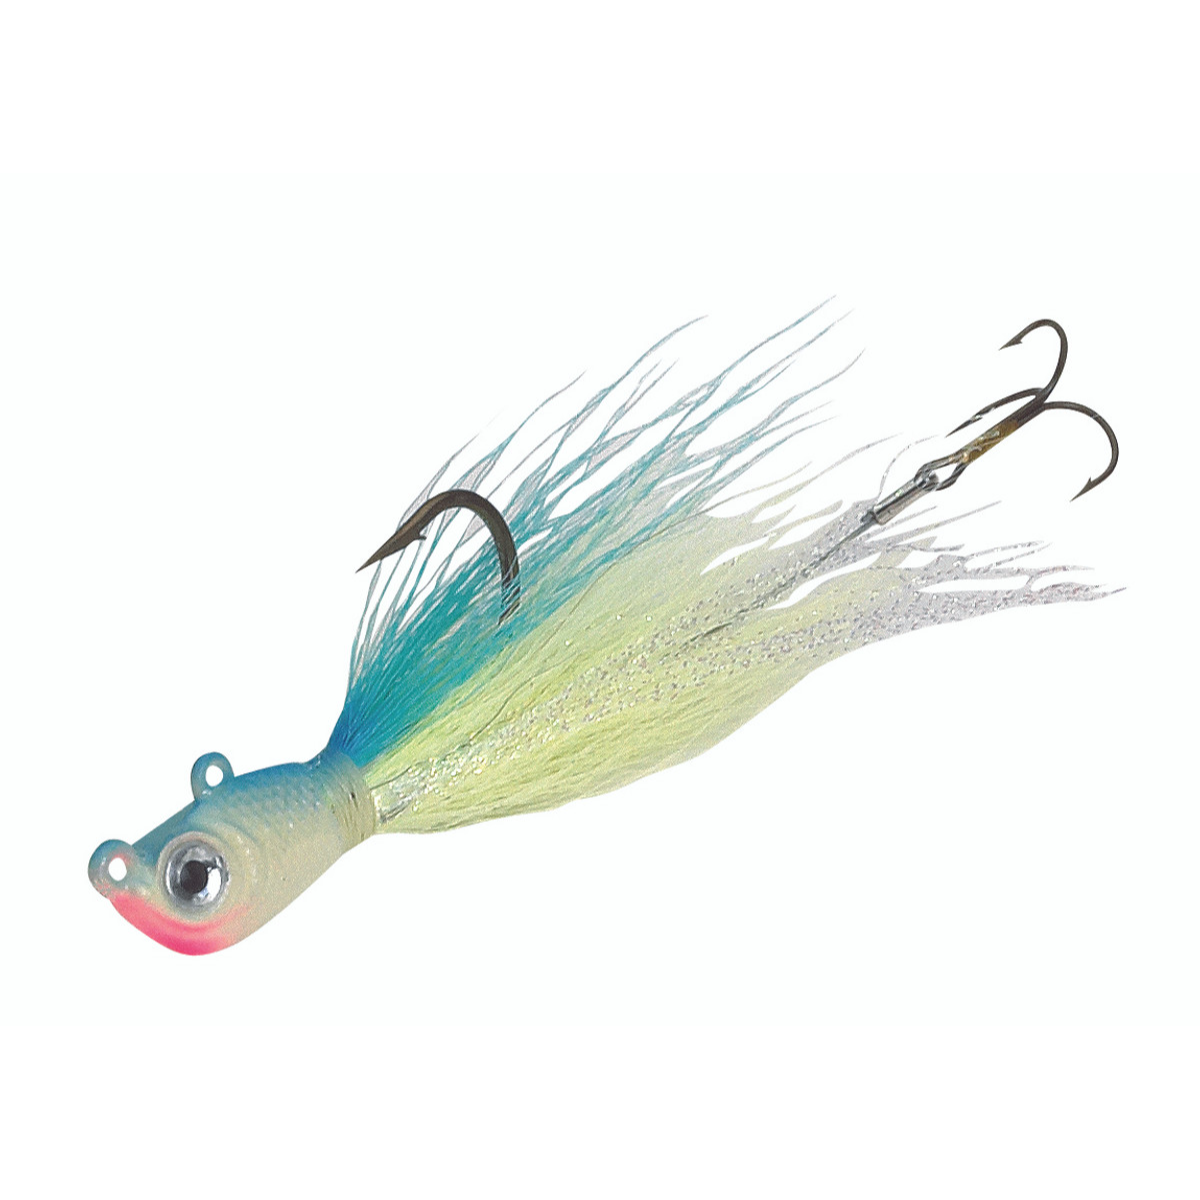 SNEAK ATTACK – Dynamic Lures